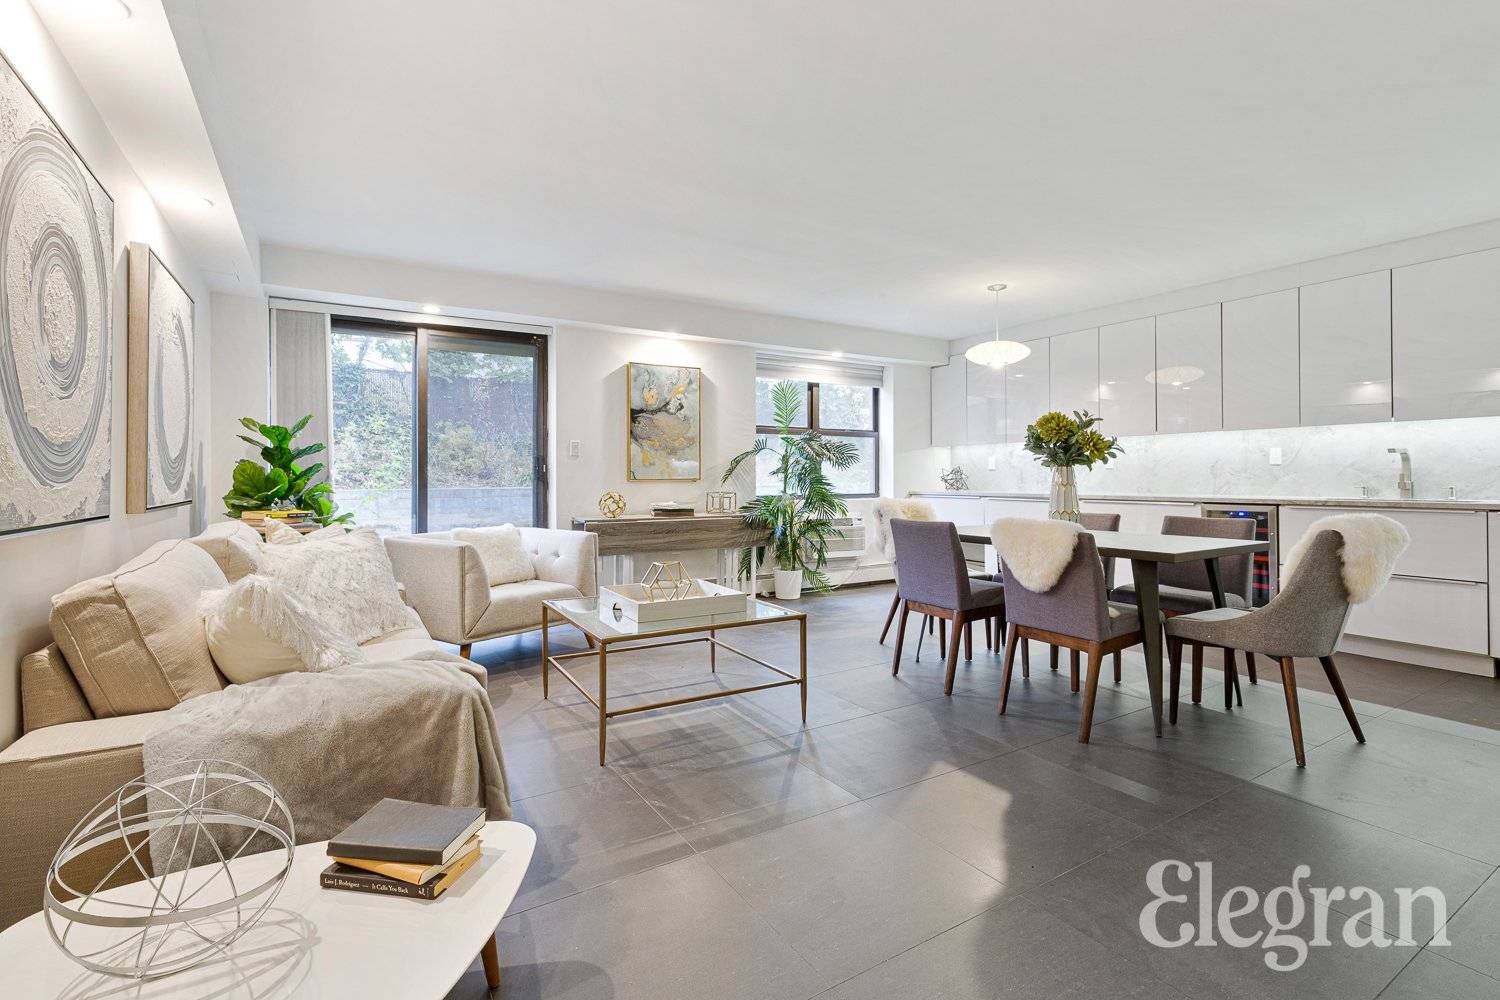 This spacious two bedroom, two bathroom apartment in Fort Greene has been beautifully renovated to create an elegant, modern space with a bright and airy atmosphere.